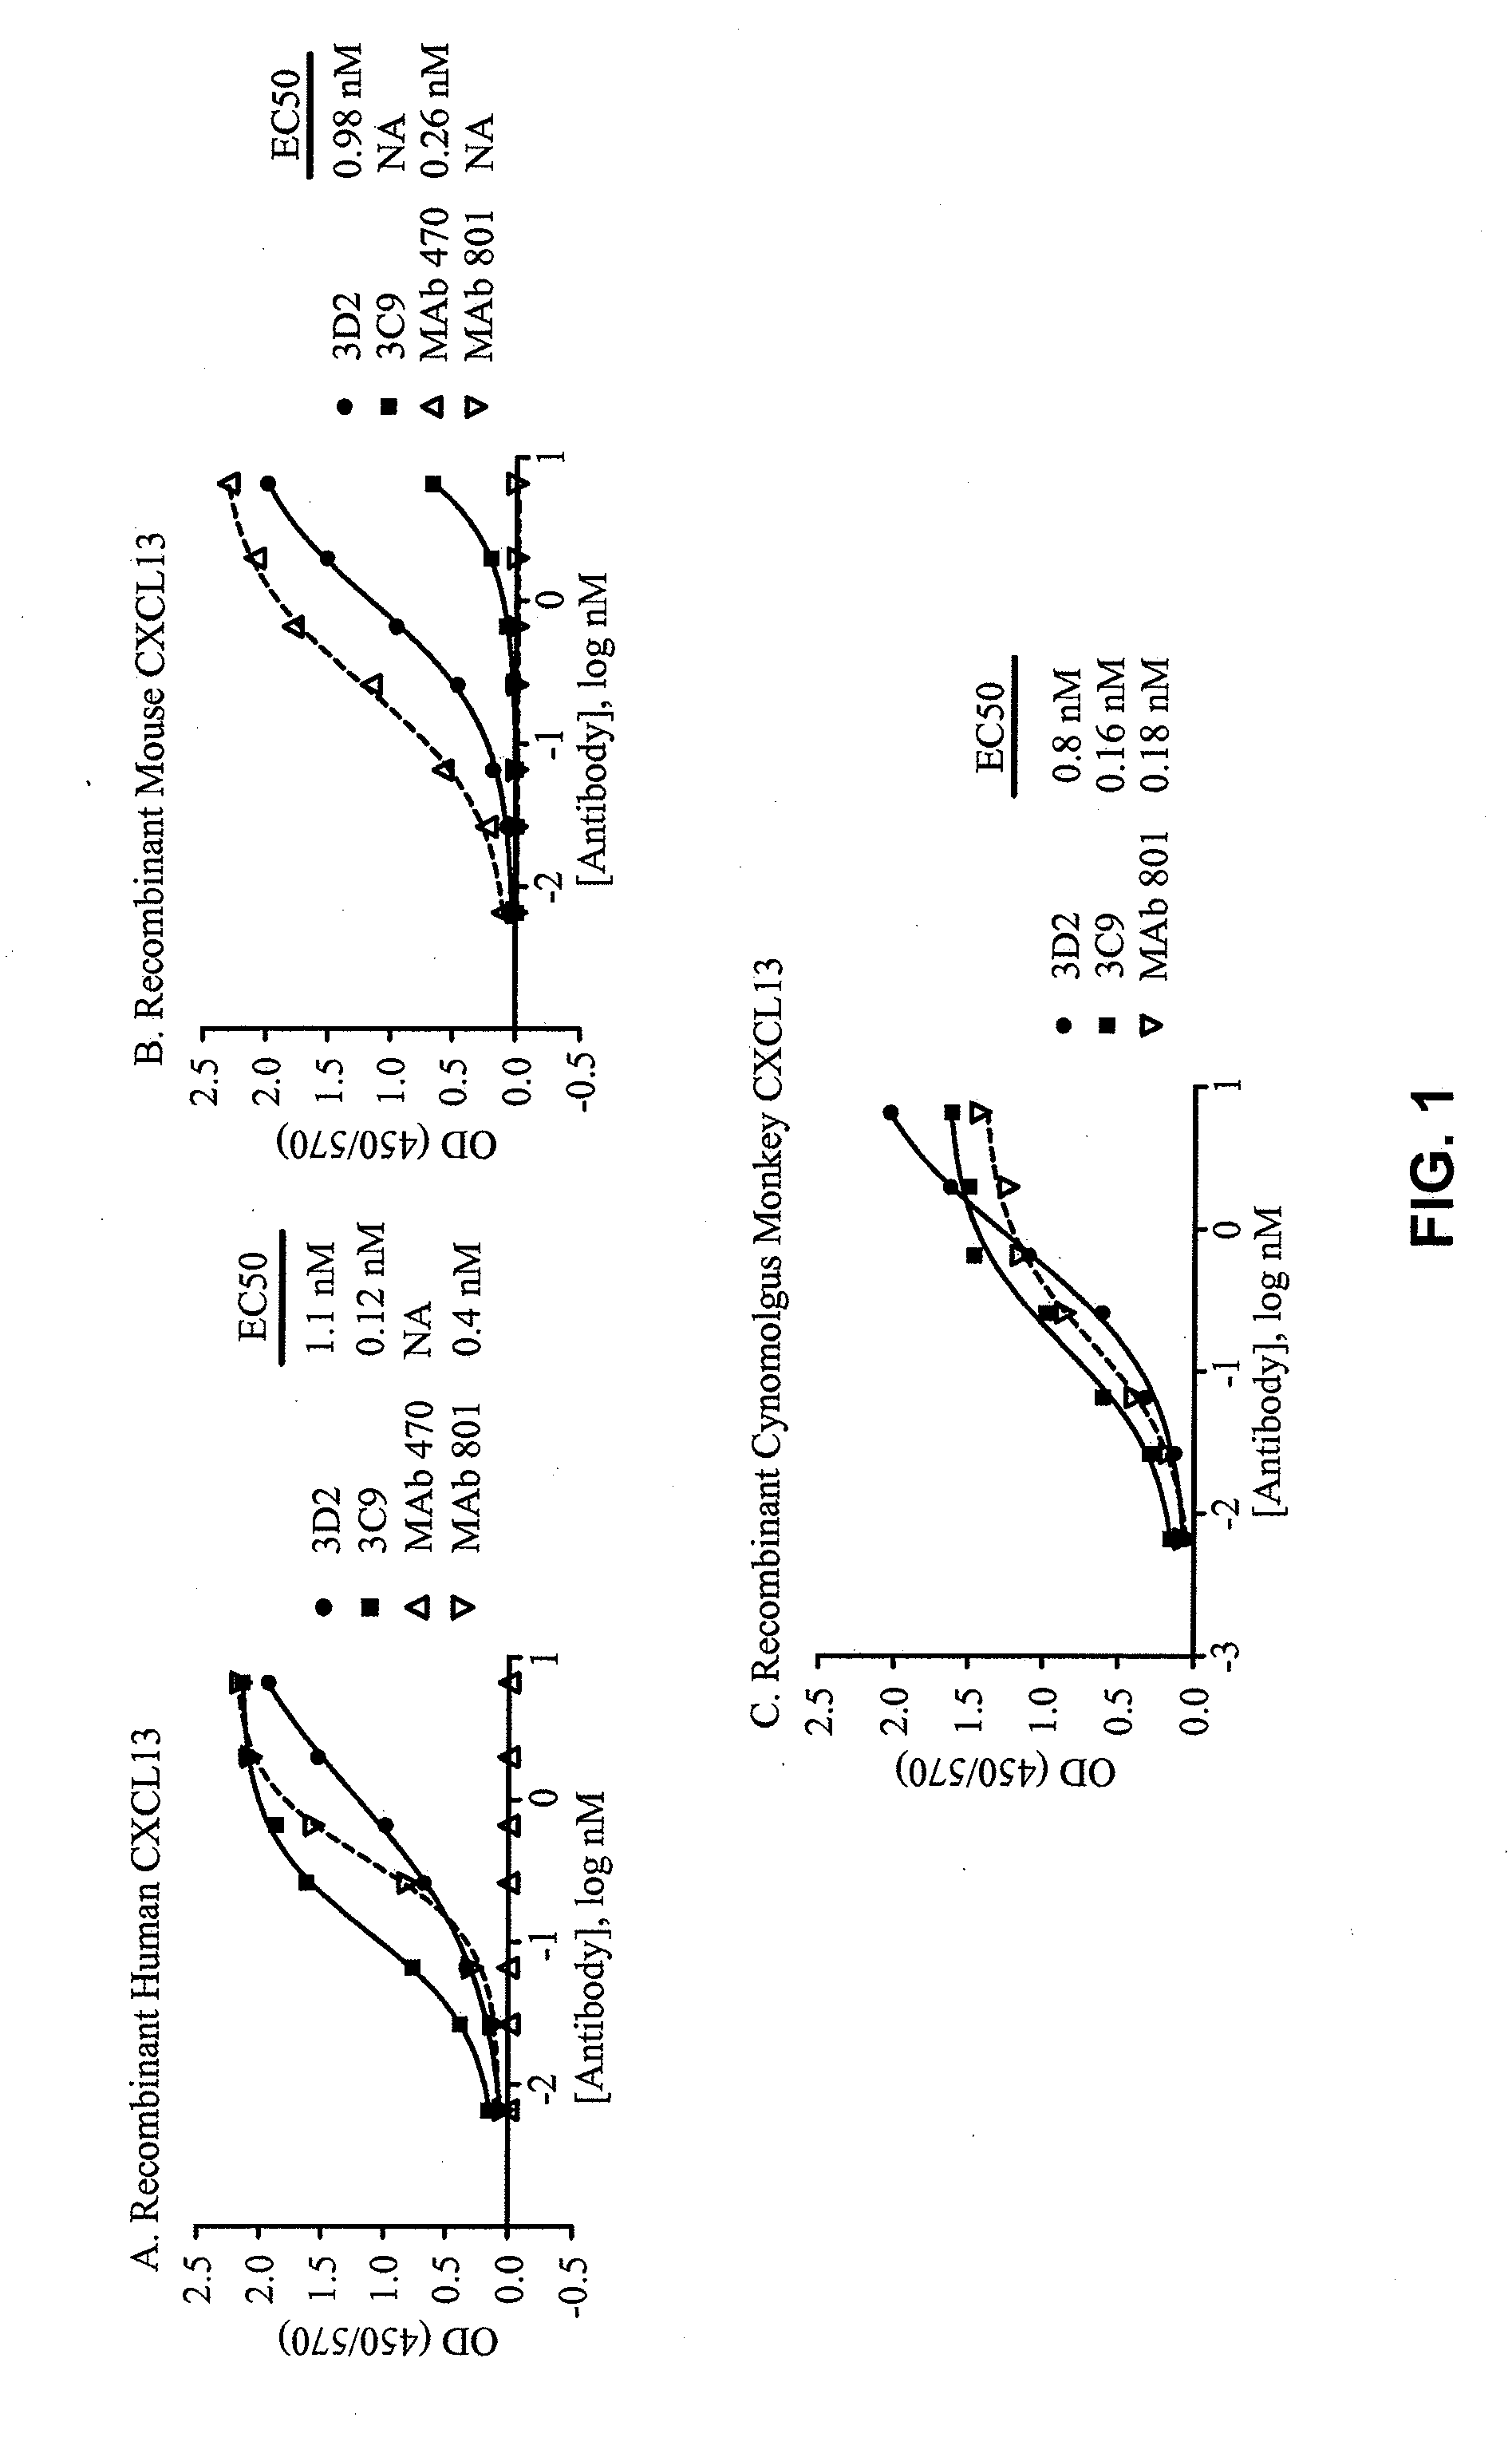 Anti-cxcl13 antibodies and associated epitope sequences